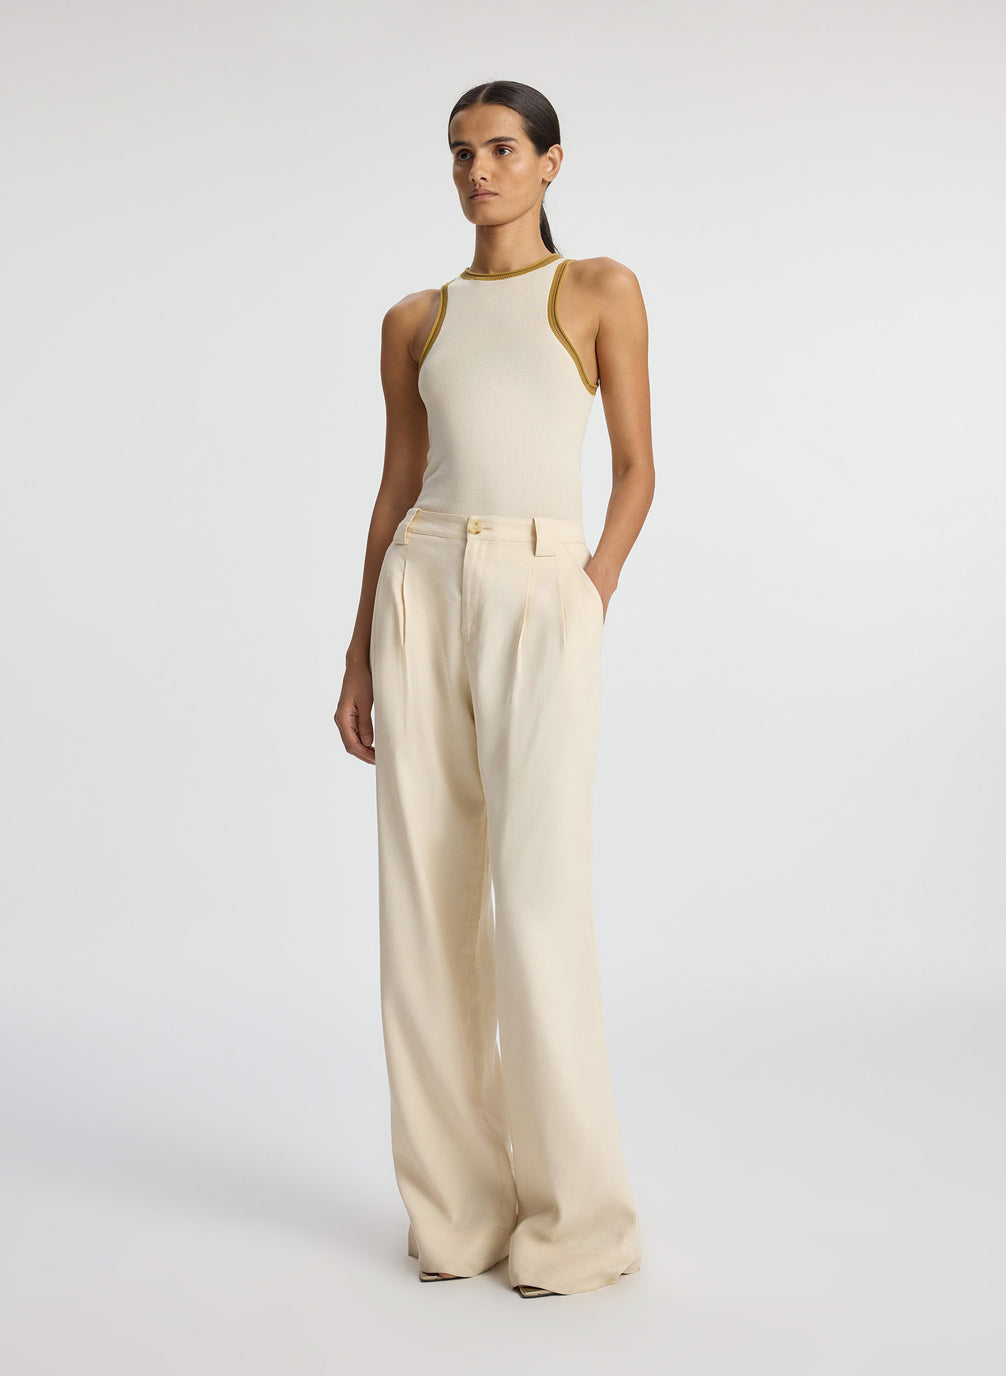 side view of woman wearing cream tank top and beige wide leg pants